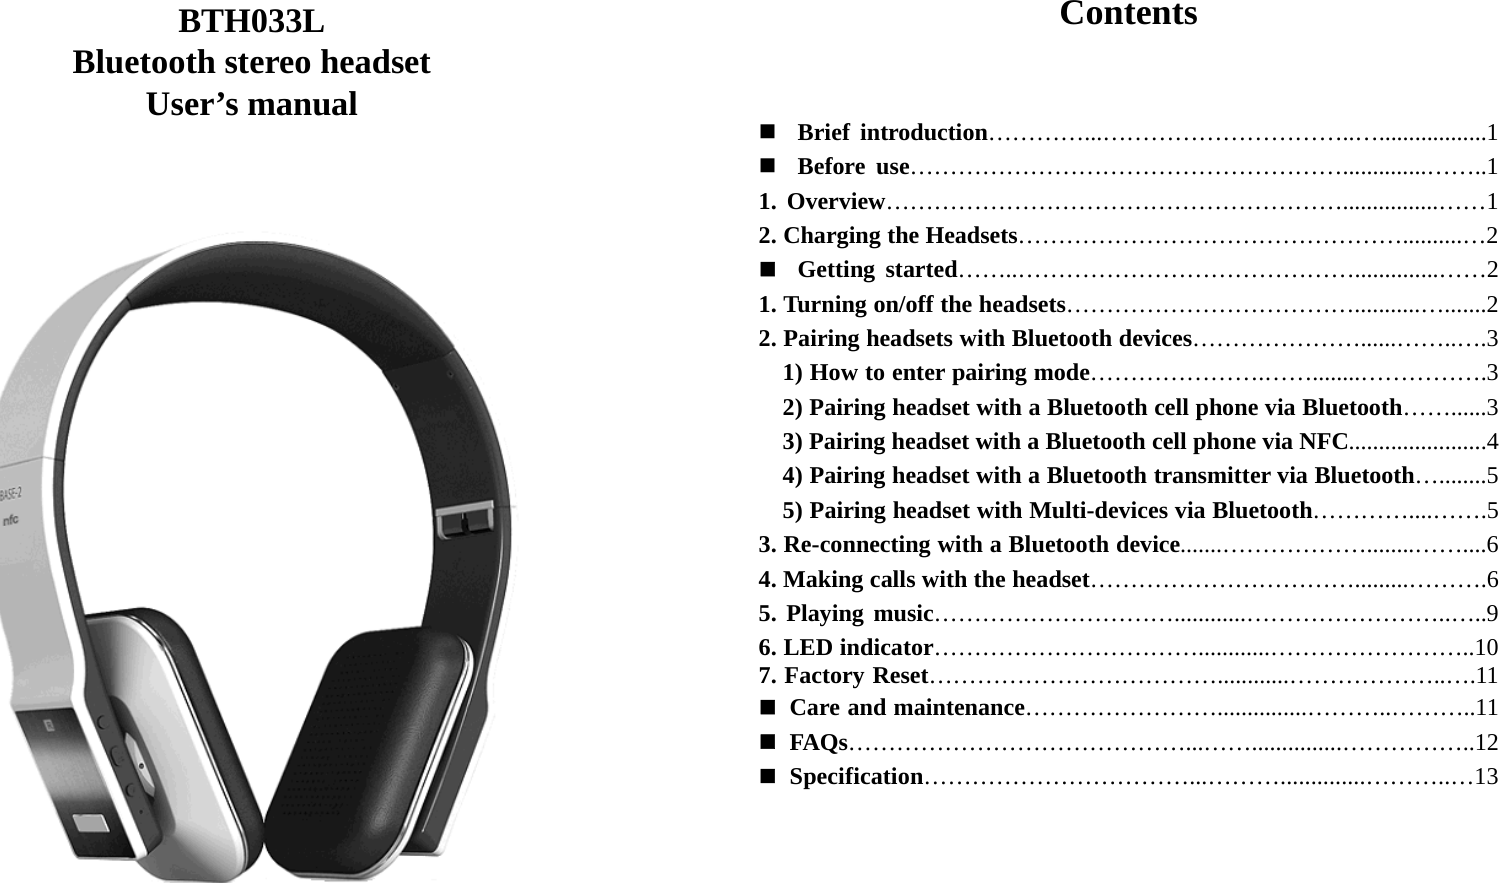   BTH033L Bluetooth stereo headset User’s manual                               Contents    Brief introduction…………...…………………………..…..................1  Before use………………………………………………..............……..1 1. Overview…………………………………………………................……1 2. Charging the Headsets…………………………………………..........…2  Getting started……..……………………………………..............……2 1. Turning on/off the headsets………………………………...........….......2 2. Pairing headsets with Bluetooth devices…………………......……..….3     1) How to enter pairing mode………………….……........…………….3     2) Pairing headset with a Bluetooth cell phone via Bluetooth……......3     3) Pairing headset with a Bluetooth cell phone via NFC.......................4     4) Pairing headset with a Bluetooth transmitter via Bluetooth…........5     5) Pairing headset with Multi-devices via Bluetooth…………....…….5 3. Re-connecting with a Bluetooth device.......………………........……....6 4. Making calls with the headset…………………………….........……….6 5. Playing music…………………………............……………………..…..9 6. LED indicator……………………………............……………………..10 7. Factory Reset………………………………............………………..….11  Care and maintenance……………………...............………..………..11  FAQs……………………………………...……...............……………..12  Specification……………………………...………..............………..…13         